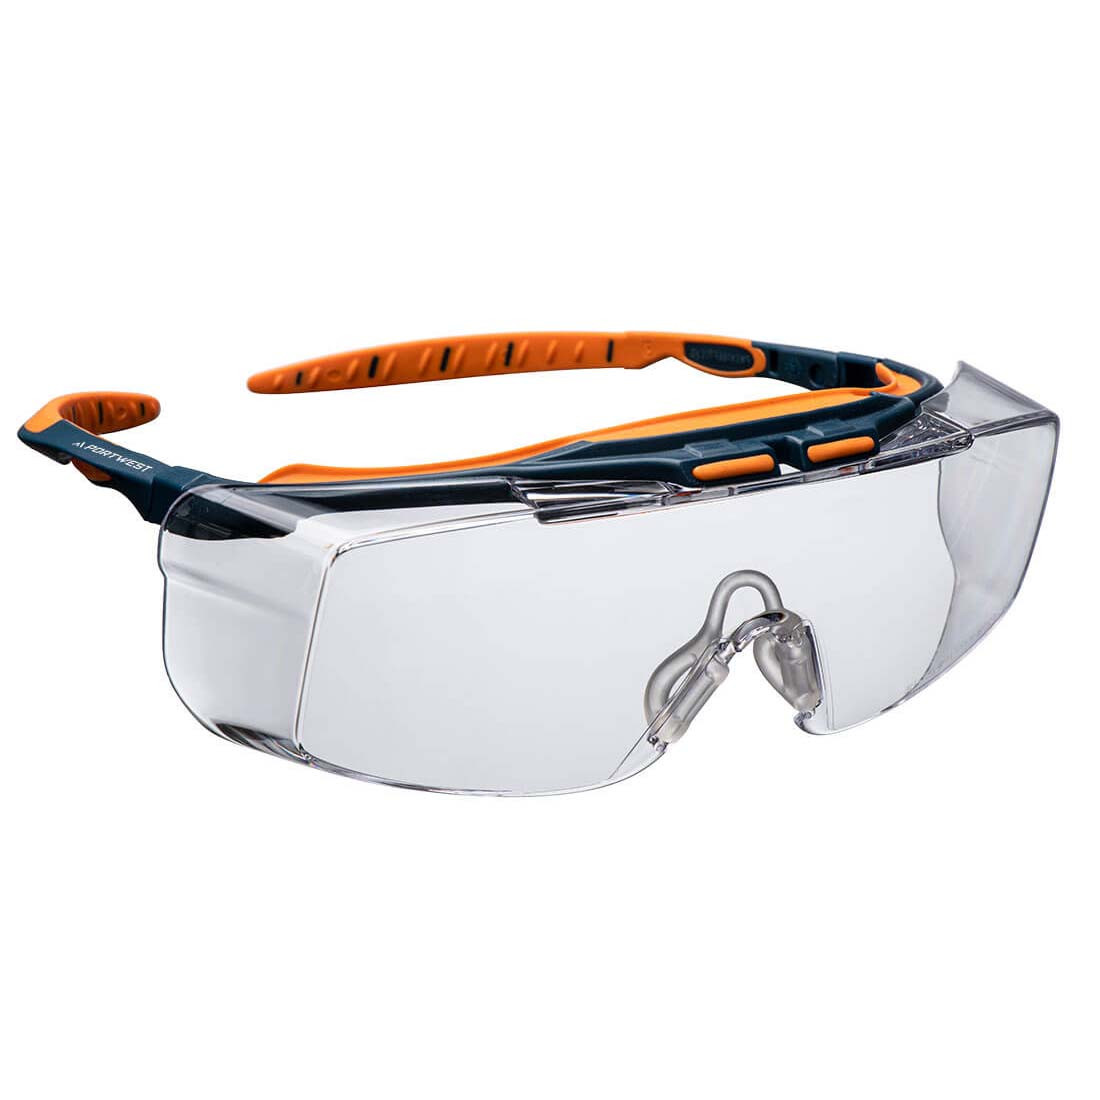 Peak OTG Safety Glasses - Personal protection